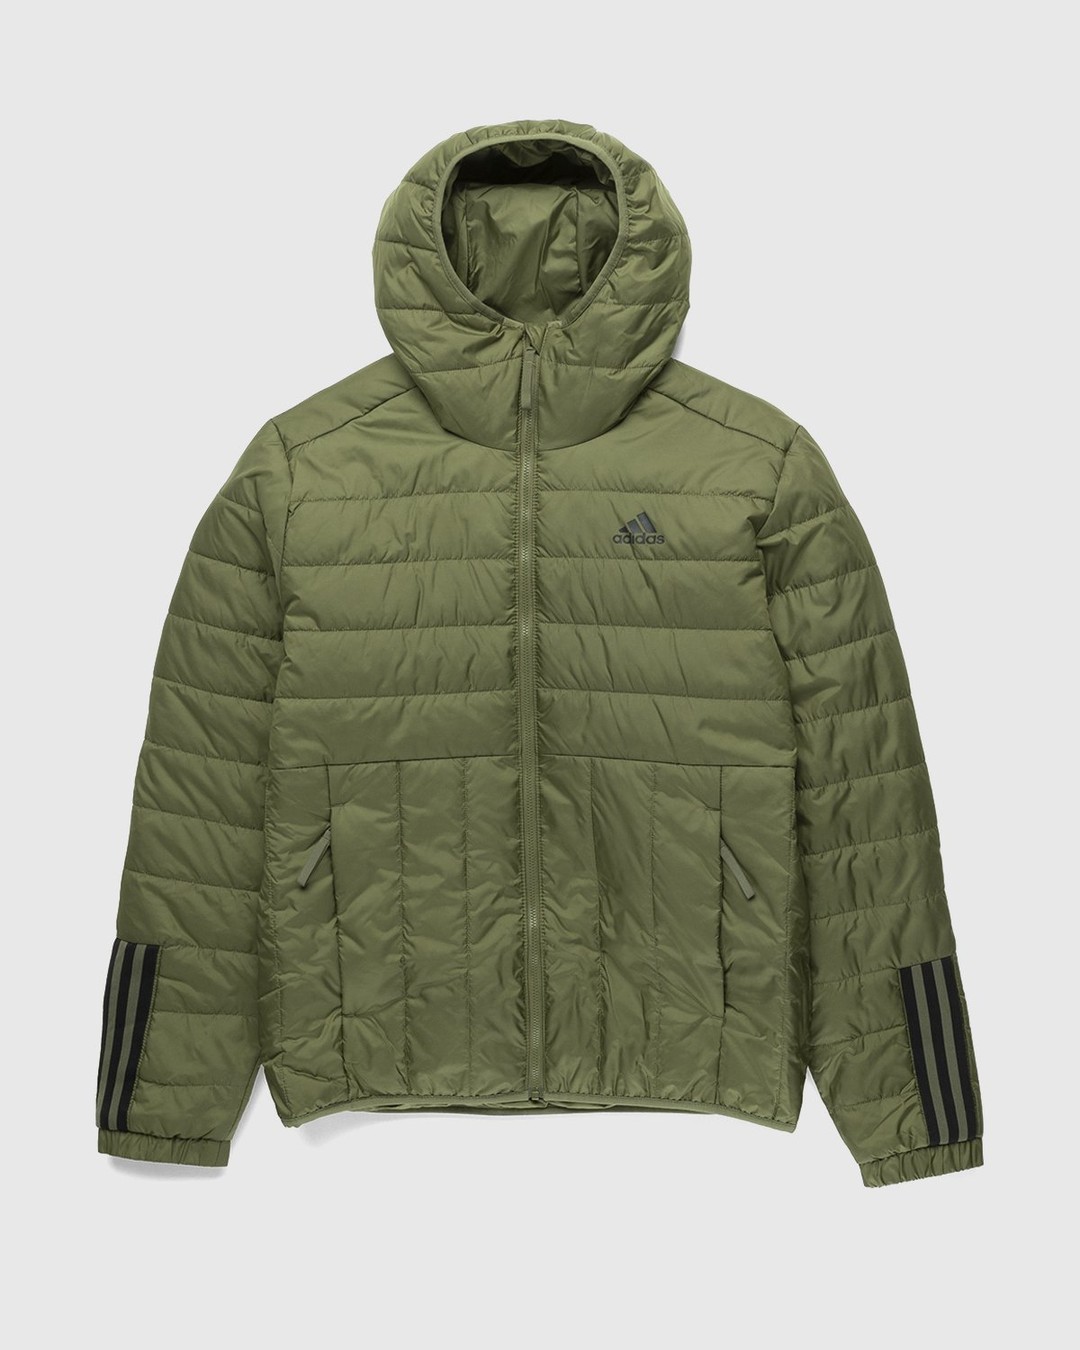 Adidas – Itavic 3-Stripes Midweight Hooded Jacket Olive - Outerwear - Green - Image 1